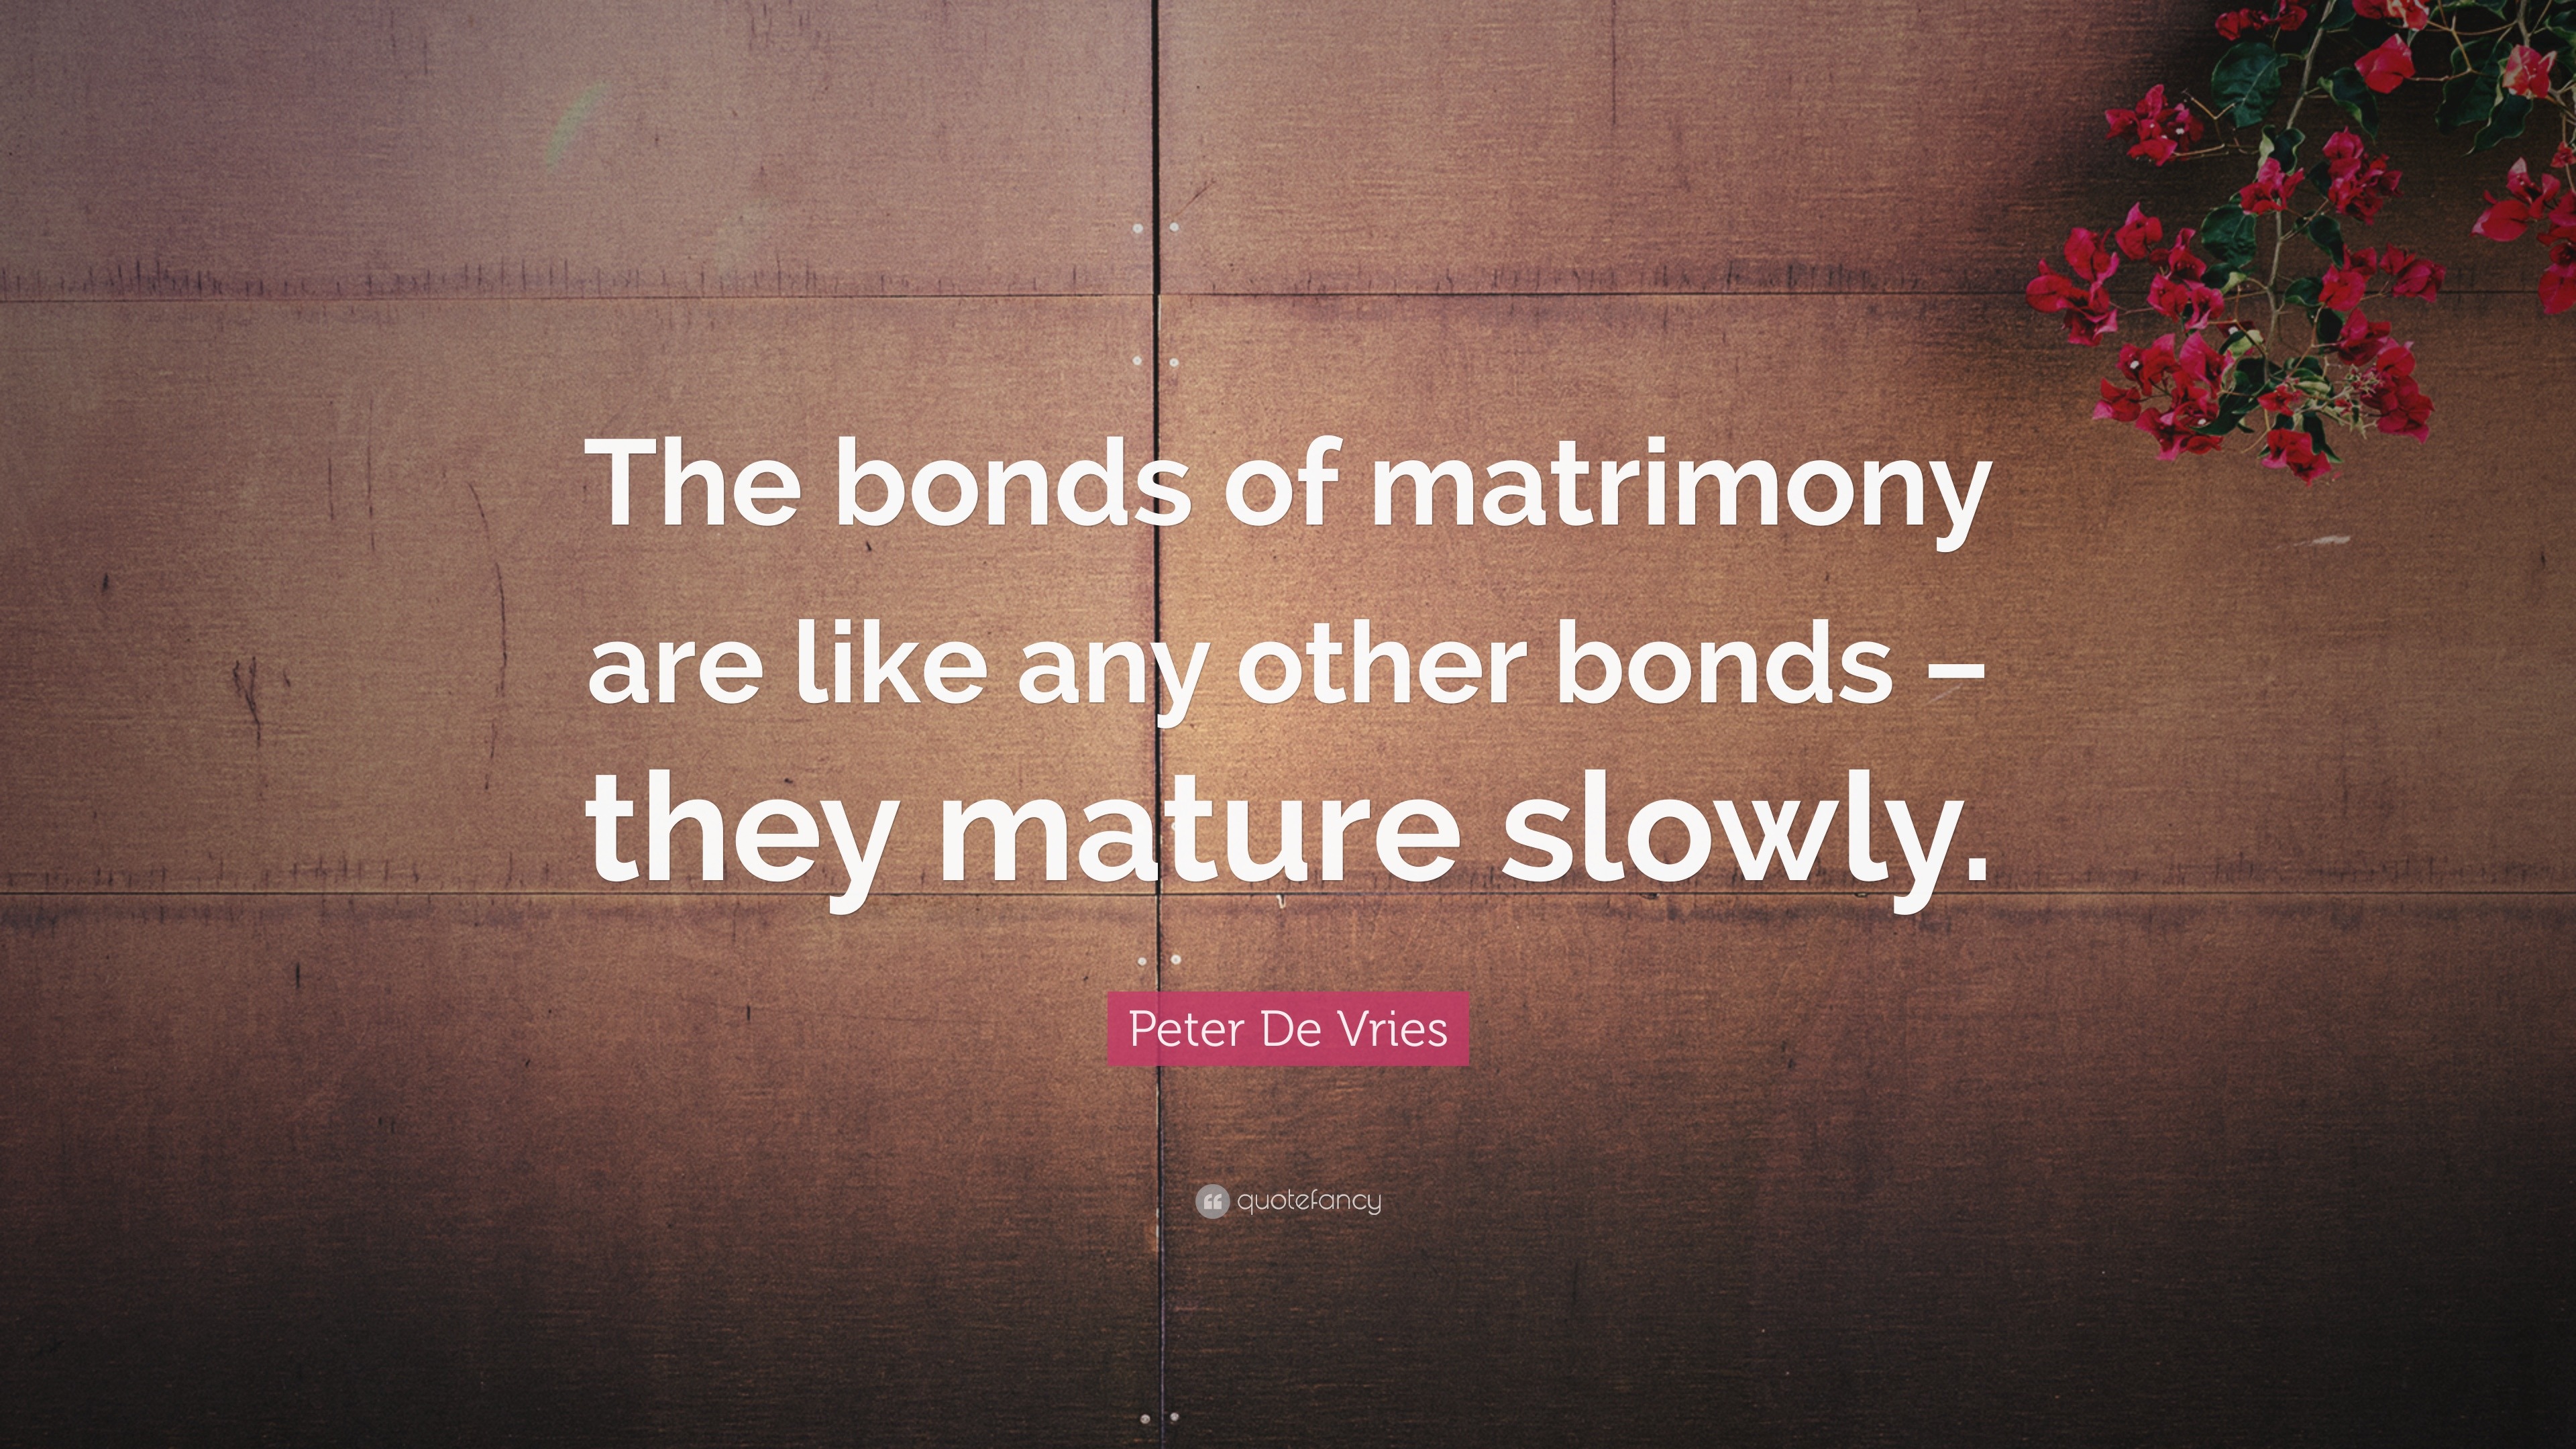 Peter De Vries Quote: "The bonds of matrimony are like any other bonds...